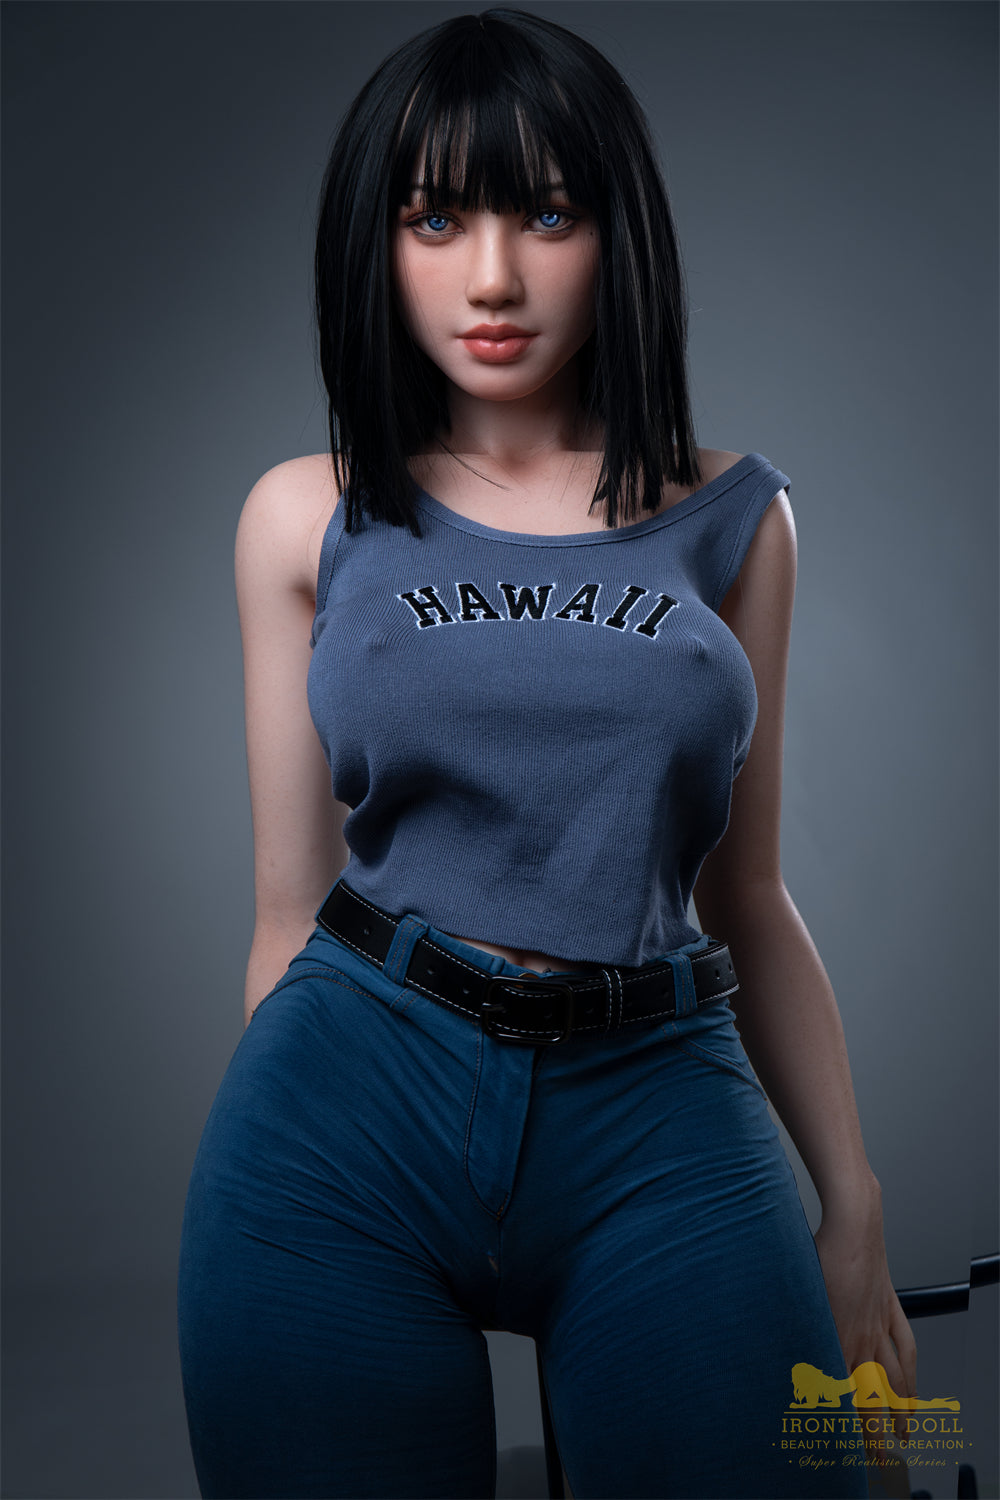 Irontech Doll 153 cm Silicone - Rita | Buy Sex Dolls at DOLLS ACTUALLY